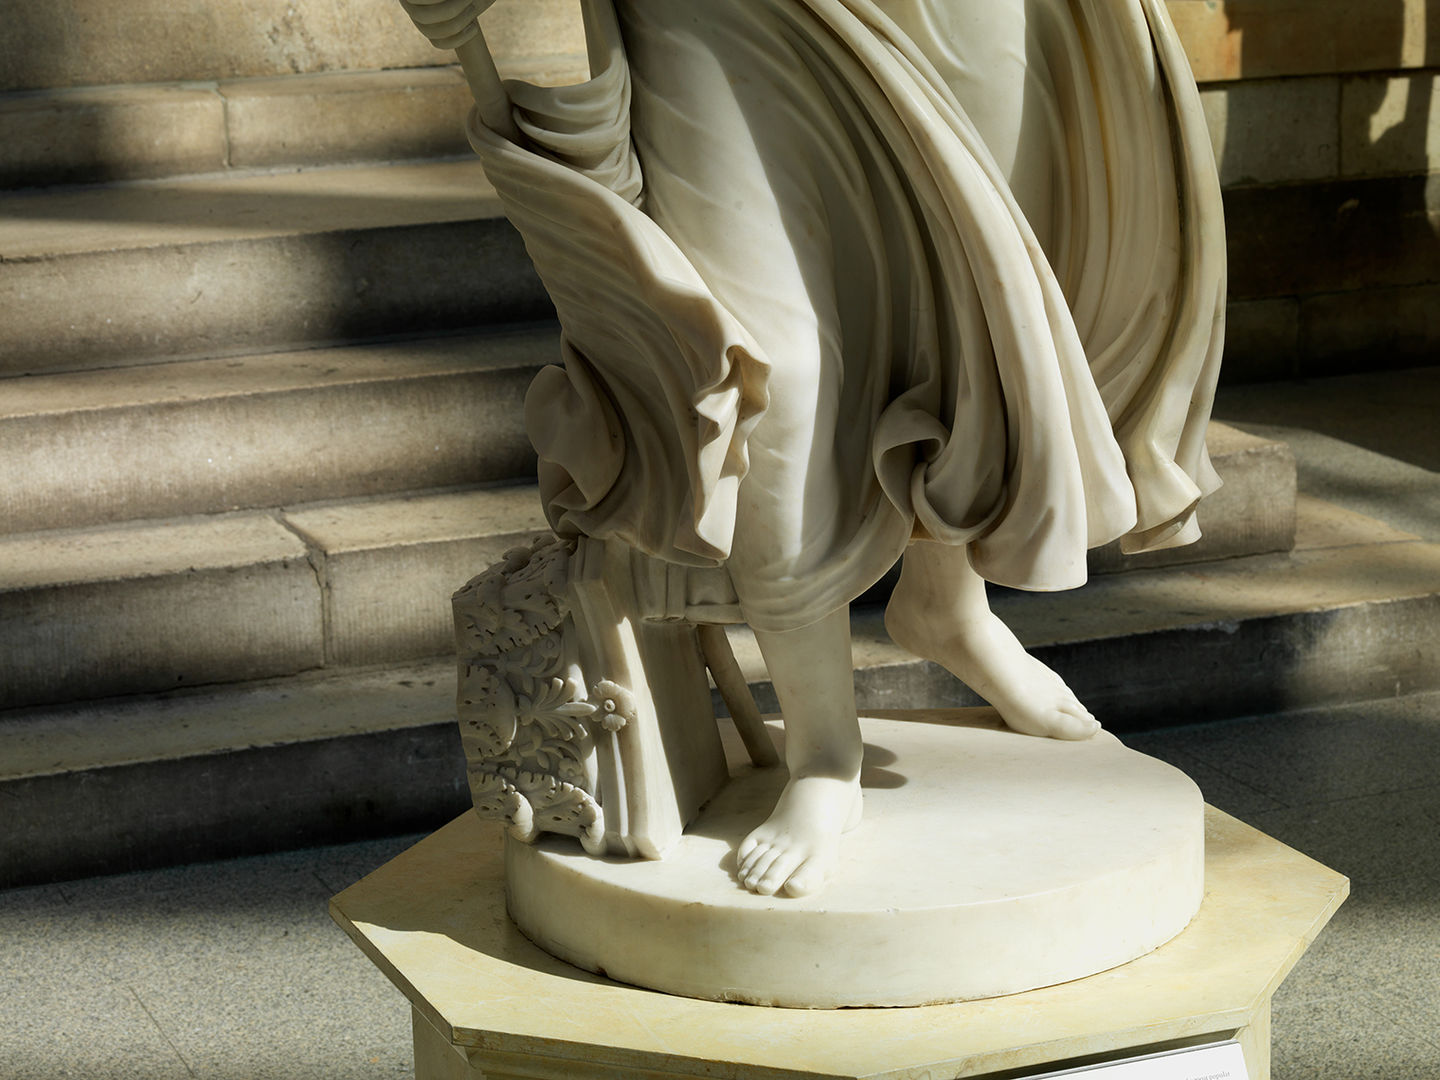 An image of the almost life-sized marble white sculpture Nydia, the blind flower girl of Pompeii, of her lower half and her flowing drapery taken in the American Wing Engelhard Sculpture Court at The Met, a skylit space with direct, dramatic natural light. Her feet are visible at the round base of the sculpture, along with a fallen Corinthian column and her staff along her right food. There are steps in the background of the shot. 